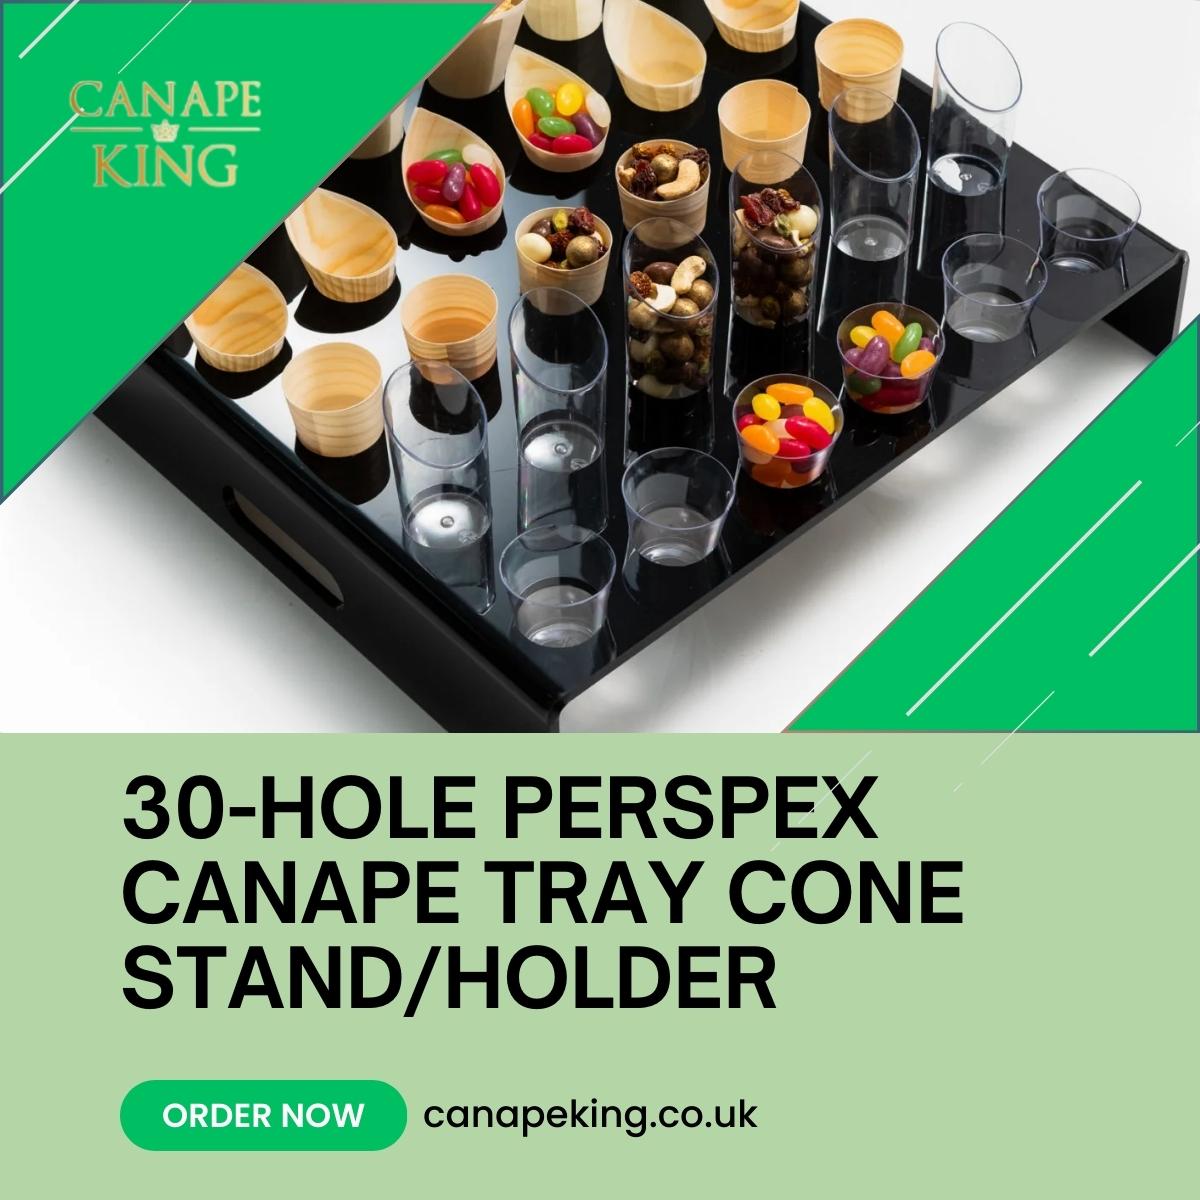 Elevate your event presentations with our 30-Hole Perspex Canape Tray Stand! 🌟✨ Order now for an elegant serving solution! 🍢🥂  

Order here: canapeking.co.uk/products/30-ho… 

#CanapeTray #sustainability #biodegradableproduct #canapeking #partyneeds #weddingsupplies #eventsupplies